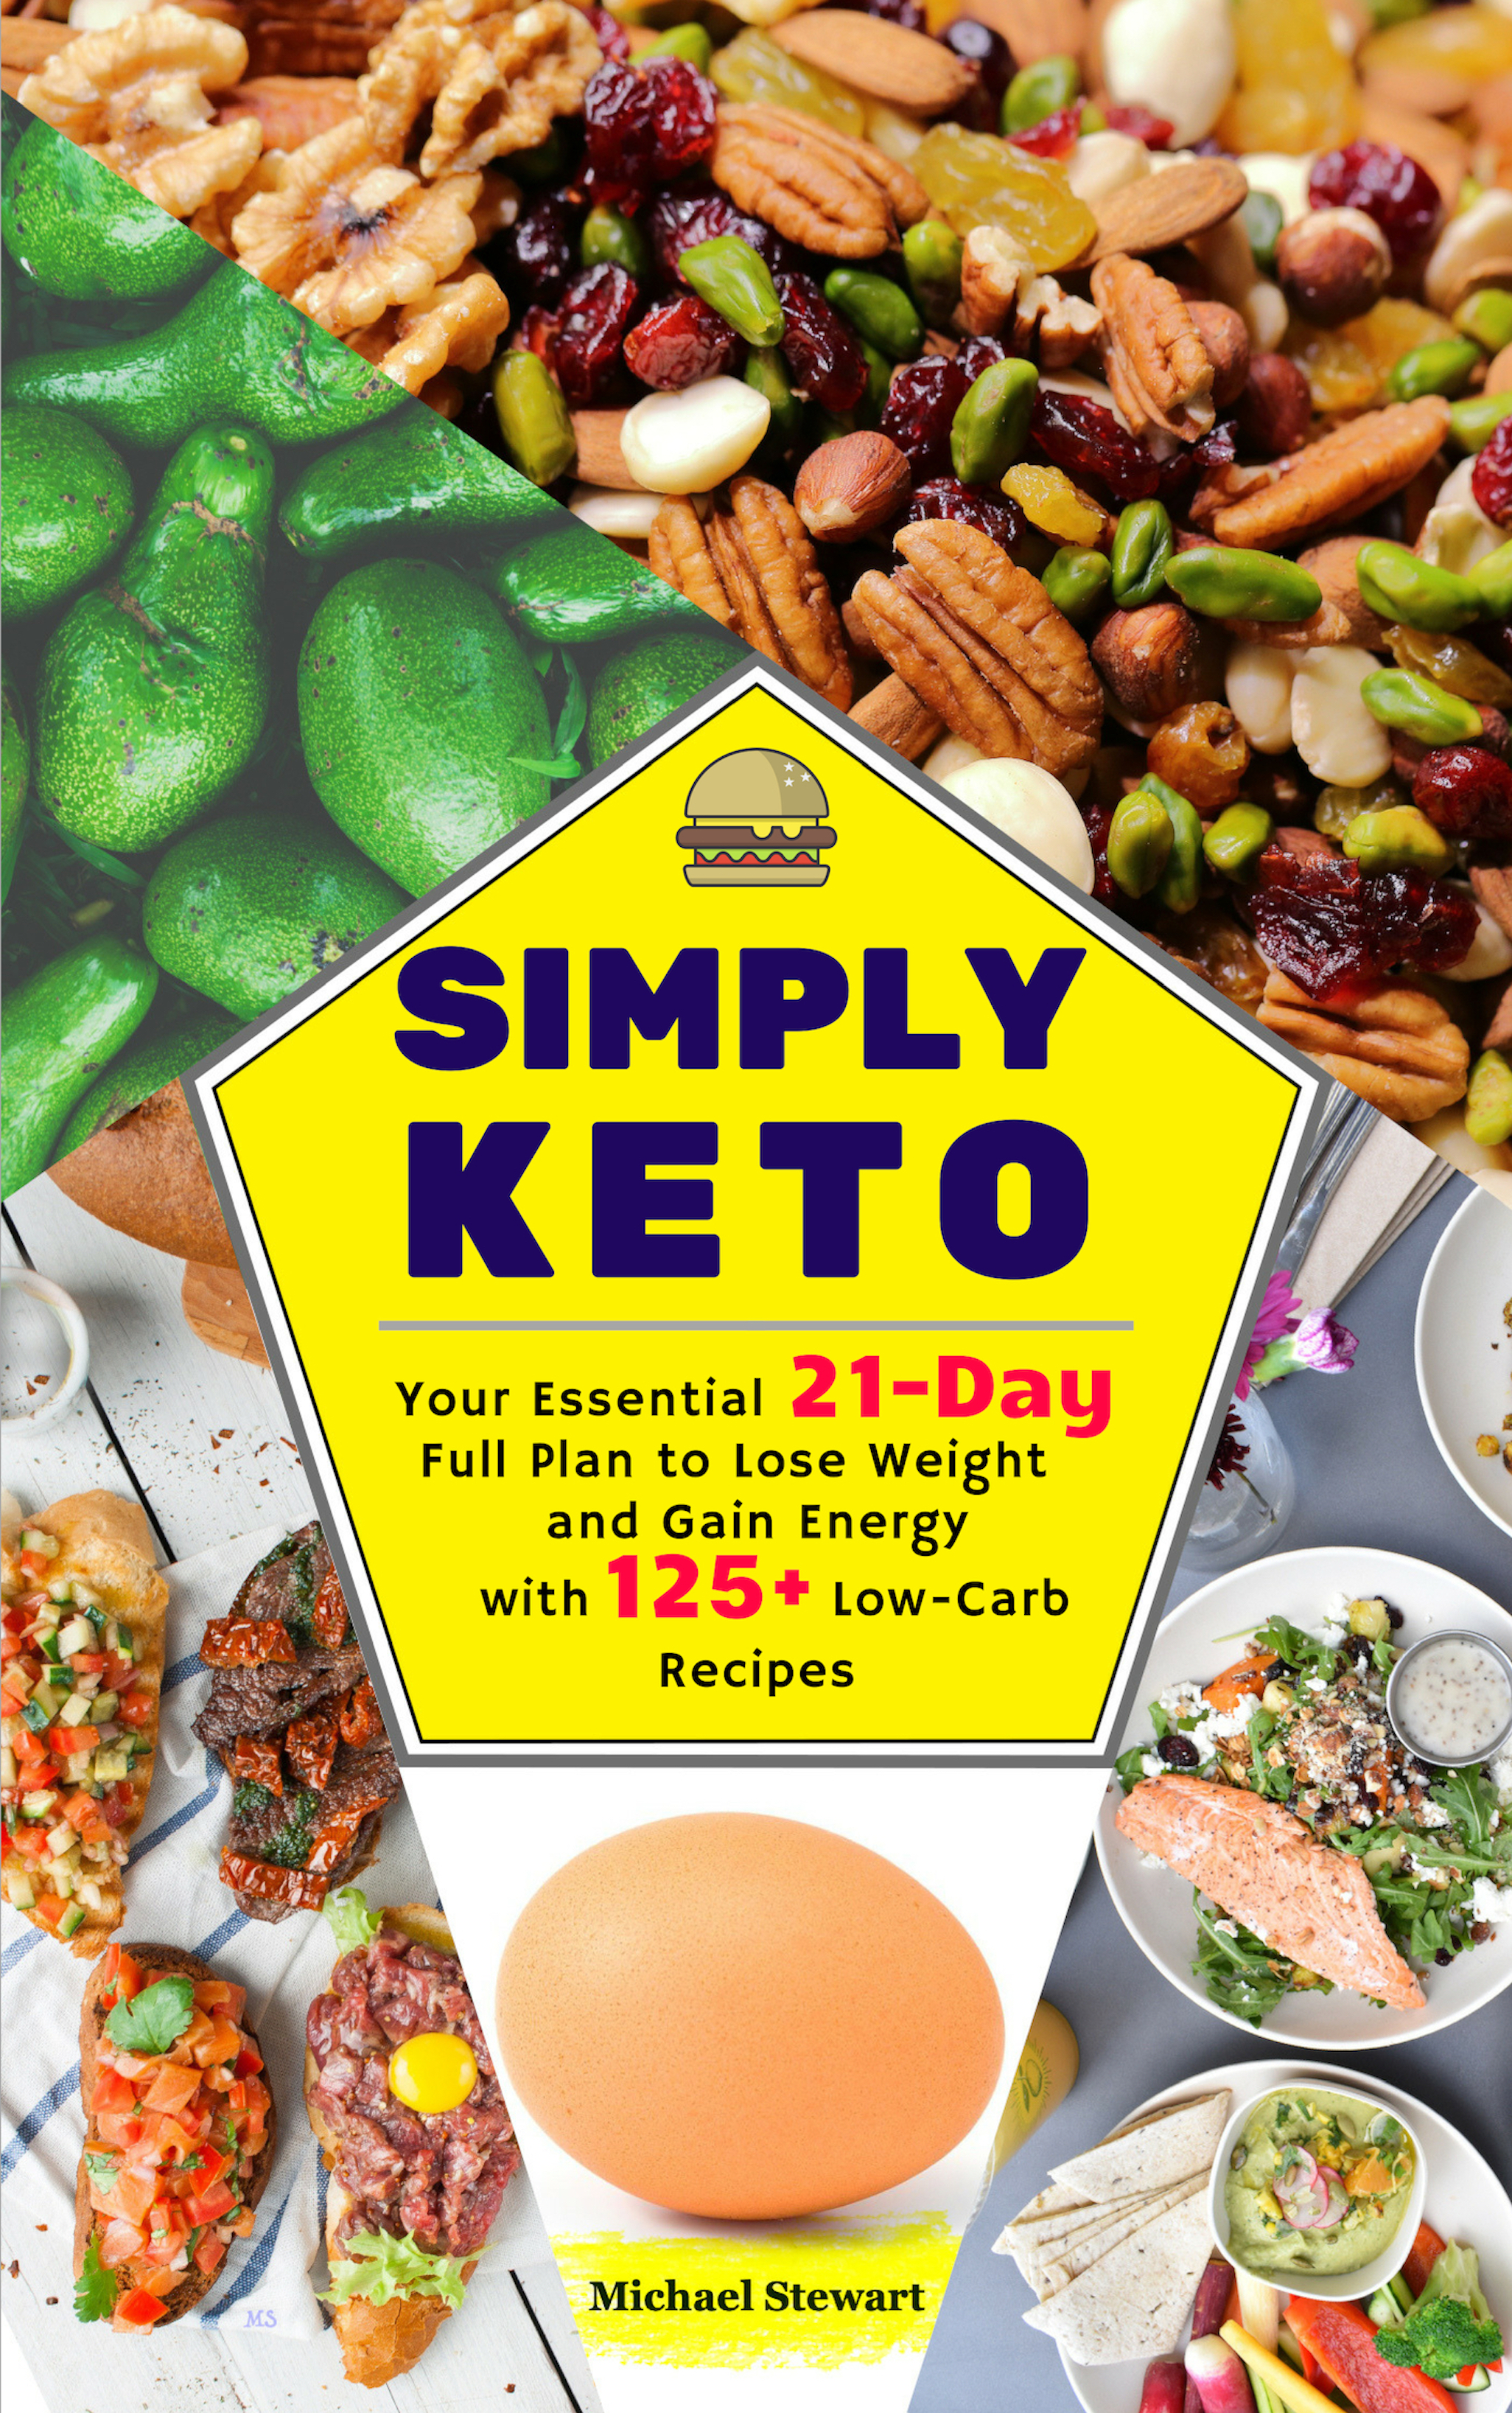 FREE: Simply Keto: Your Essential 21-Day Full Plan to Lose Weight and Gain Energy, with 125+ Low-Carb Recipes by MICAHEL STEWART